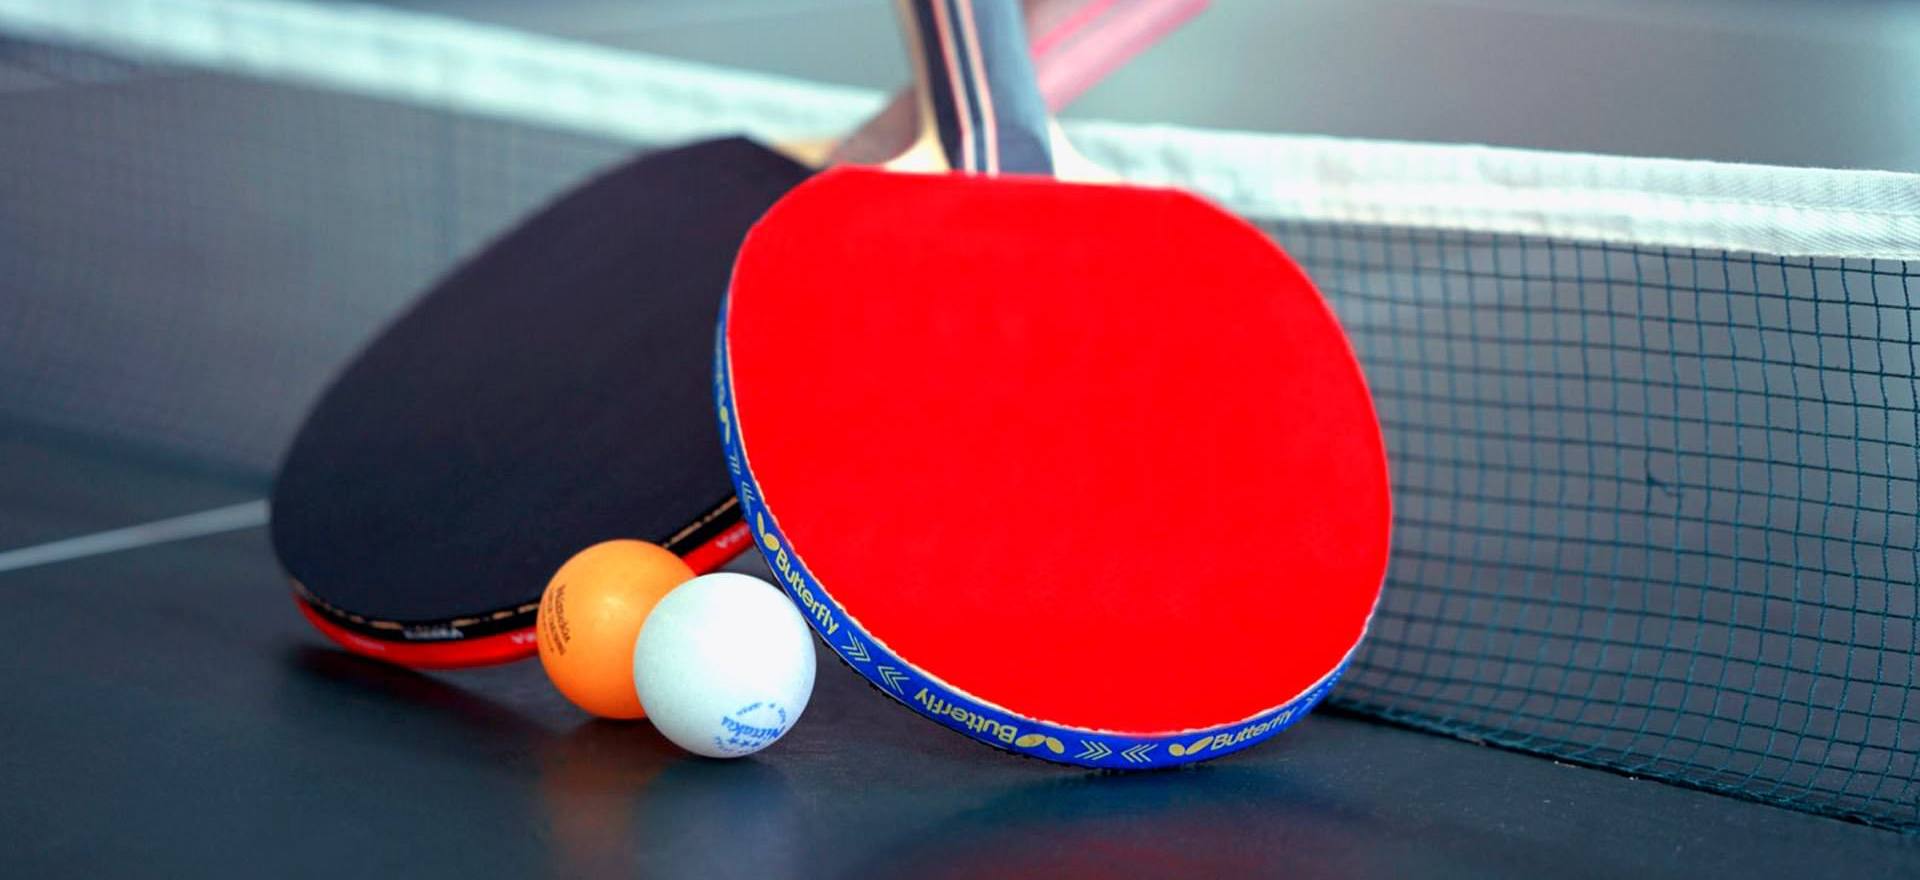 table tennis bat rubber replacement